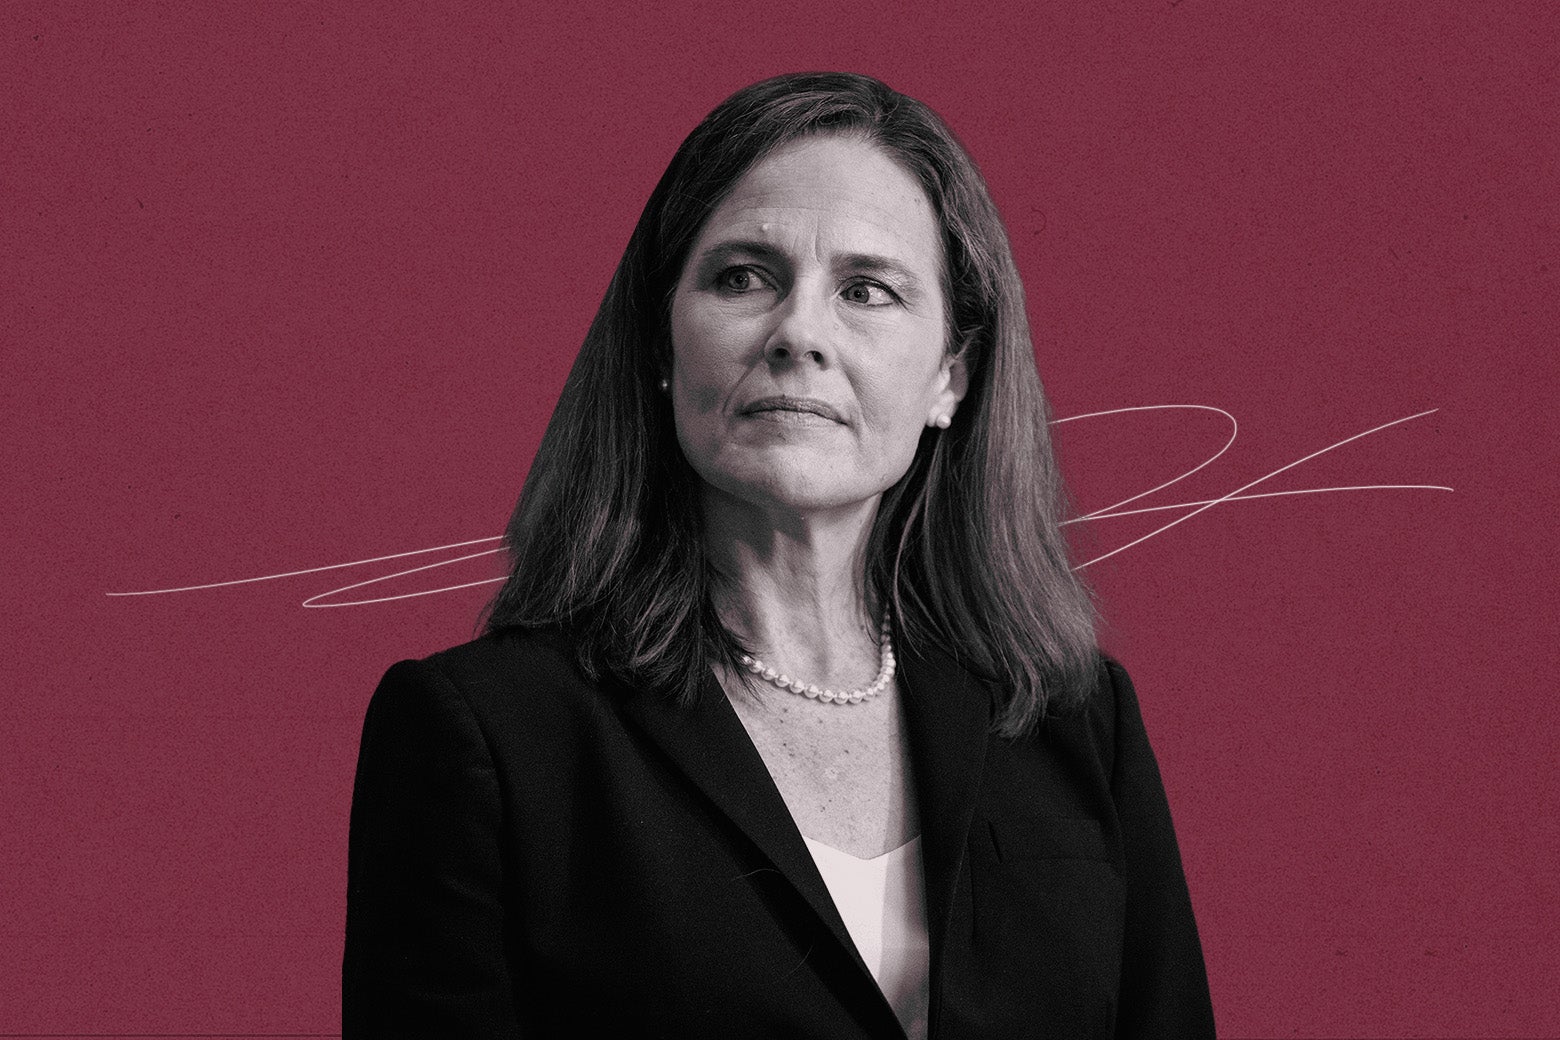 Justice Amy Coney Barrett with an indecipherable frown and a scribble behind her.